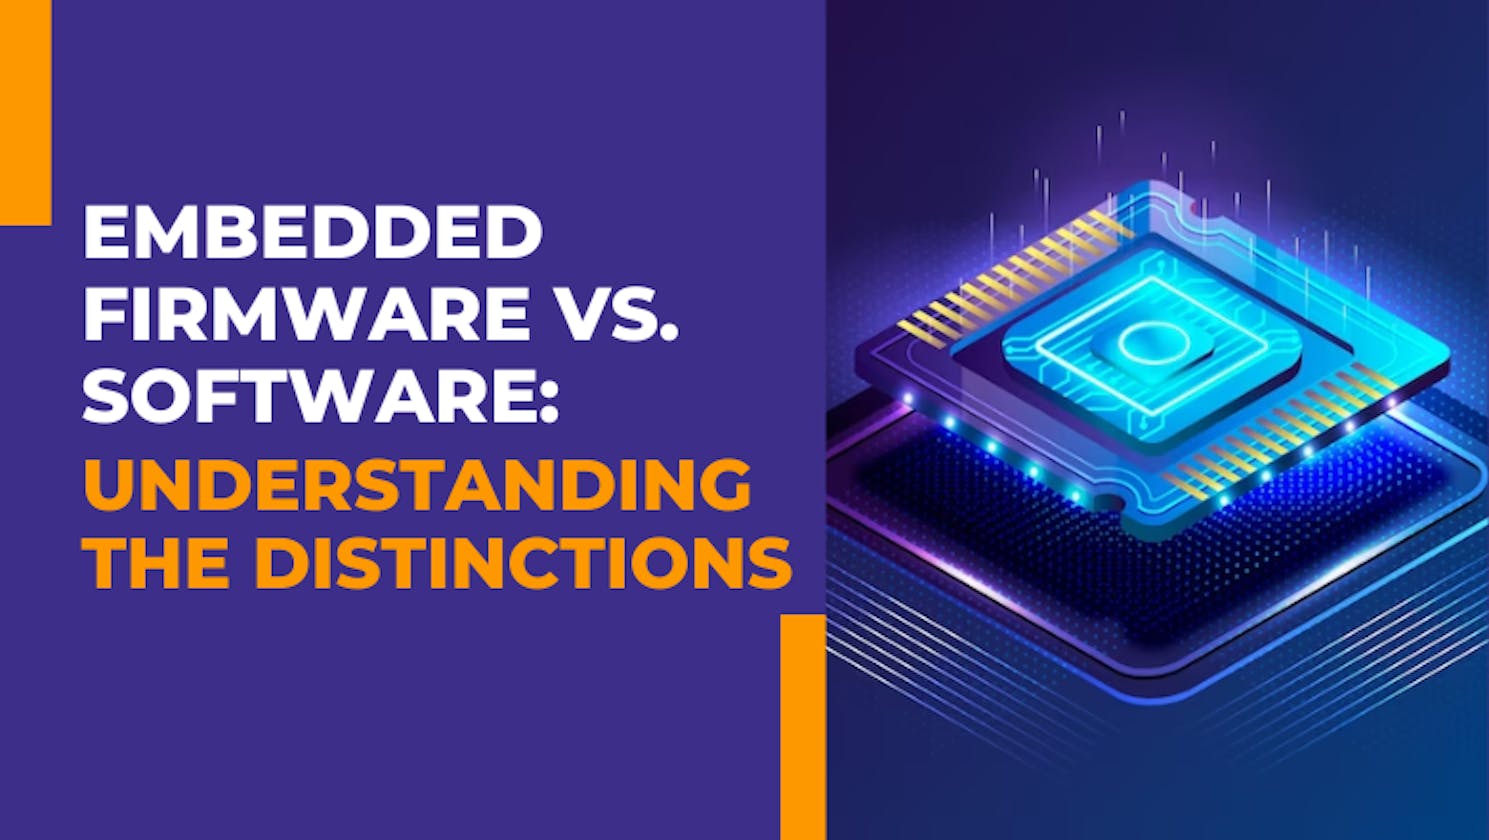 Embedded Firmware vs. Software: Understanding the Distinctions